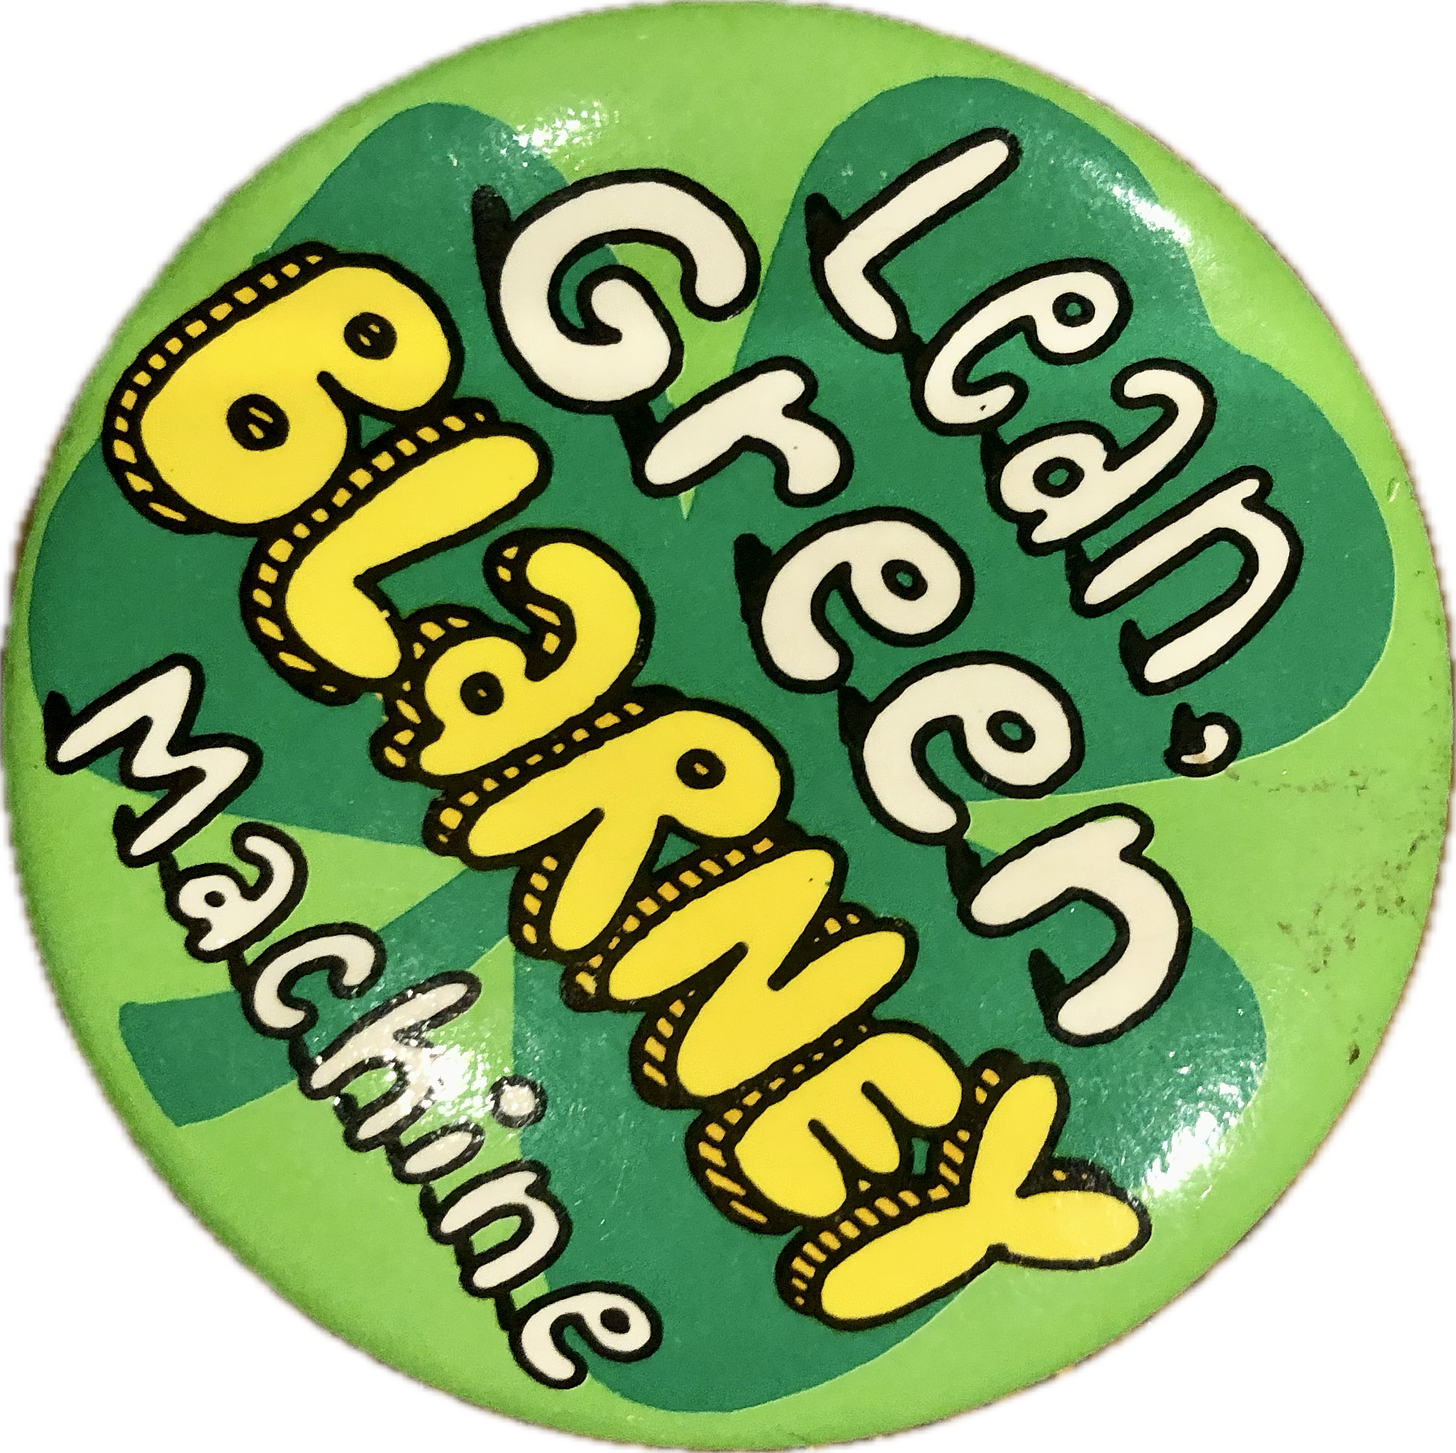 A St. Patrick’s day button that says “Lean, green blarney machine.